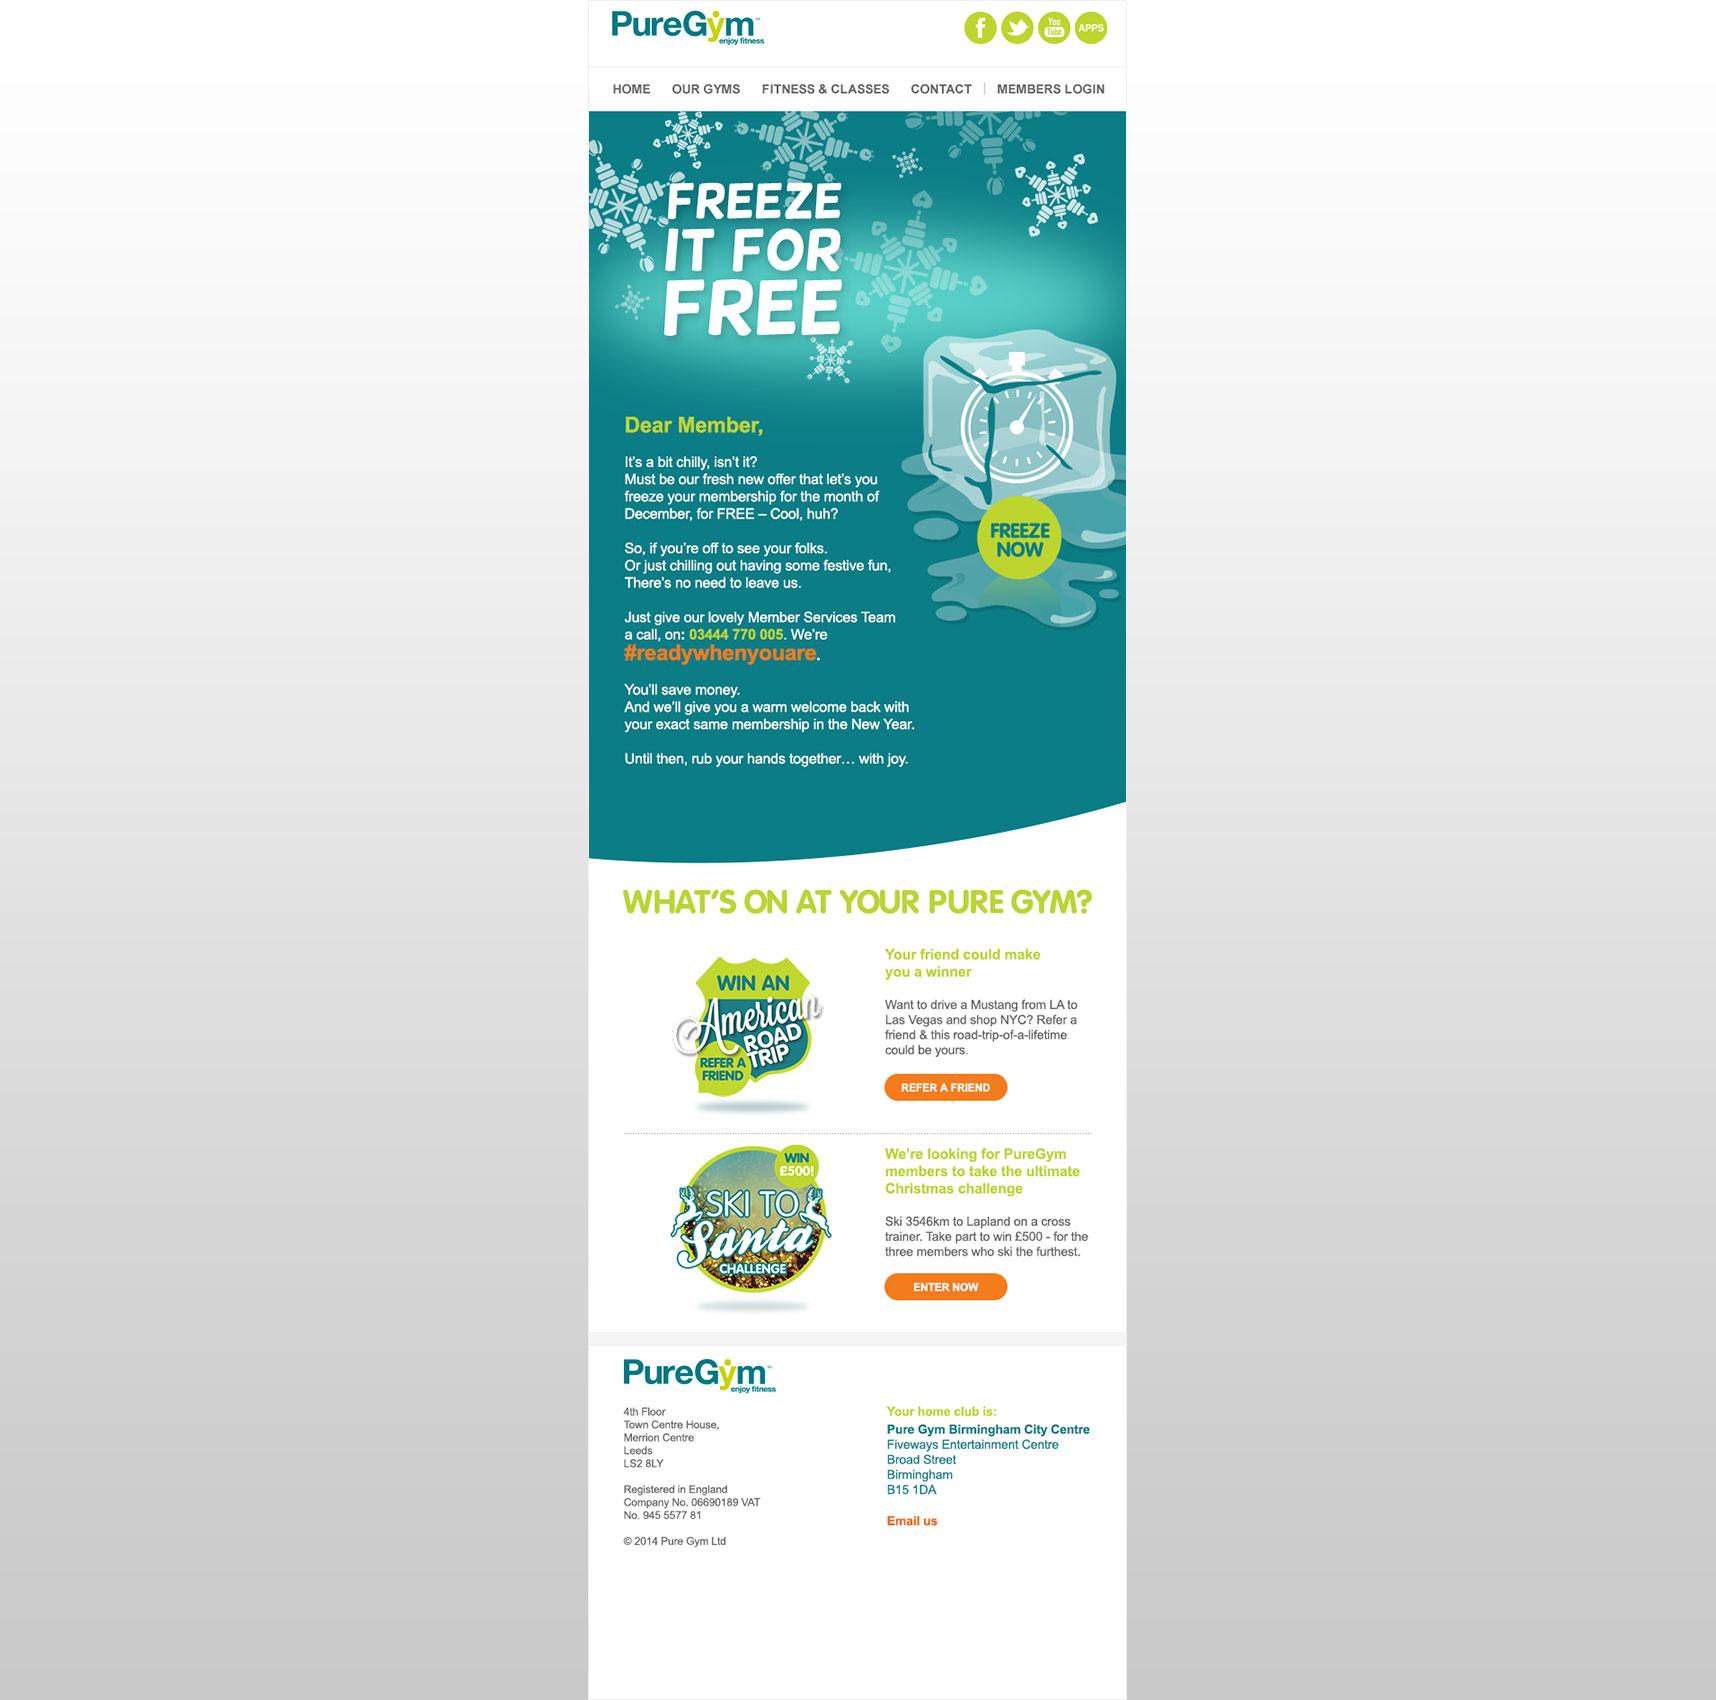 PureGym Marketing: Freeze it For Free Email - Desktop